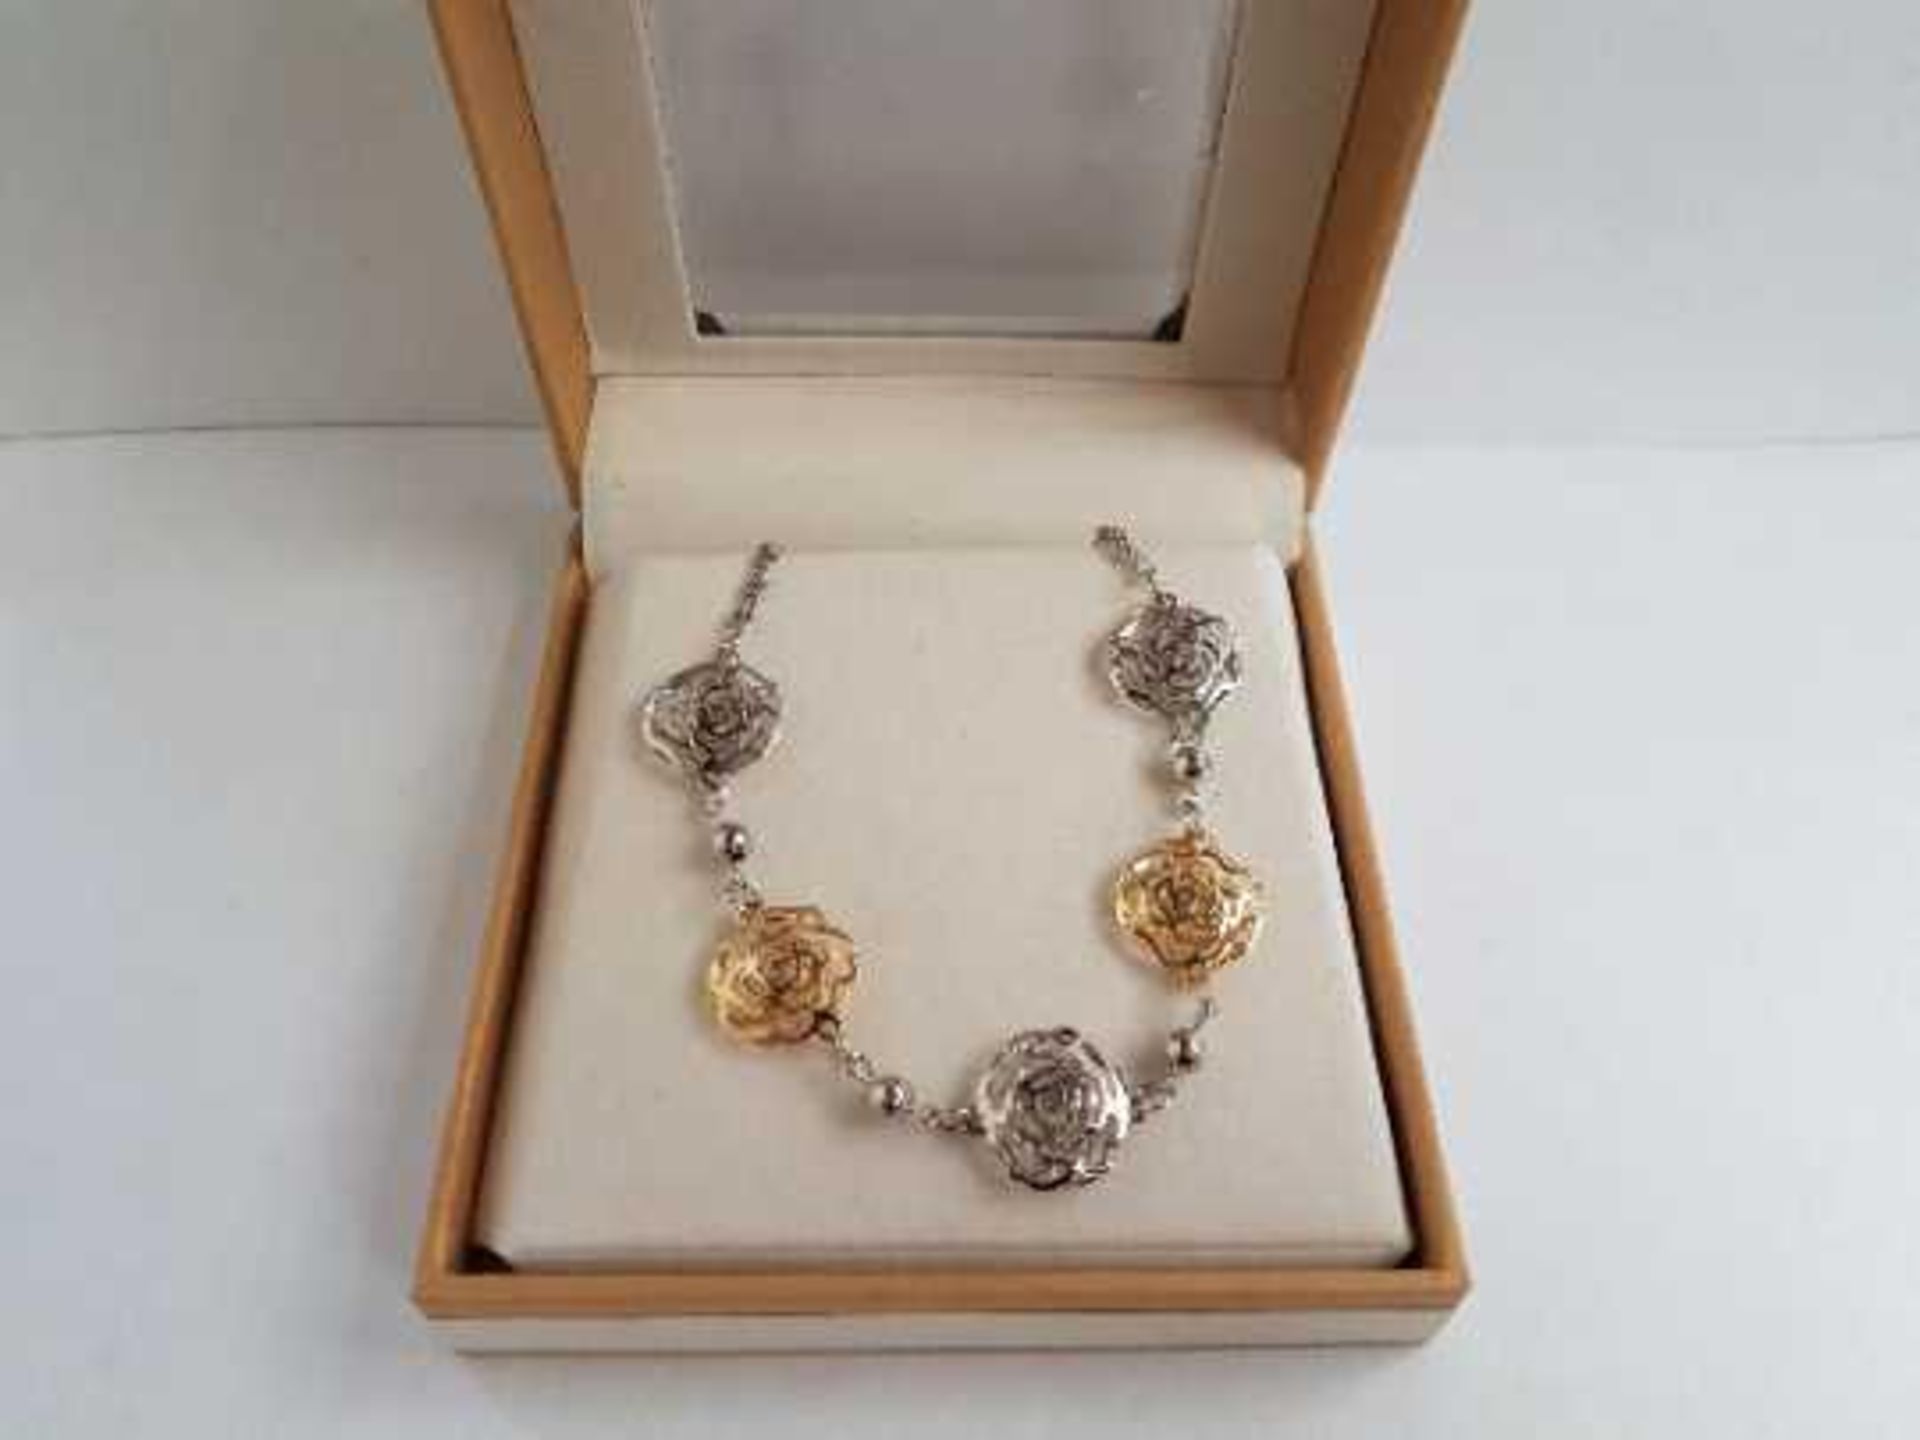 2x Andre Piasso Fashion Necklace, New in Branded Display Box - Image 2 of 2